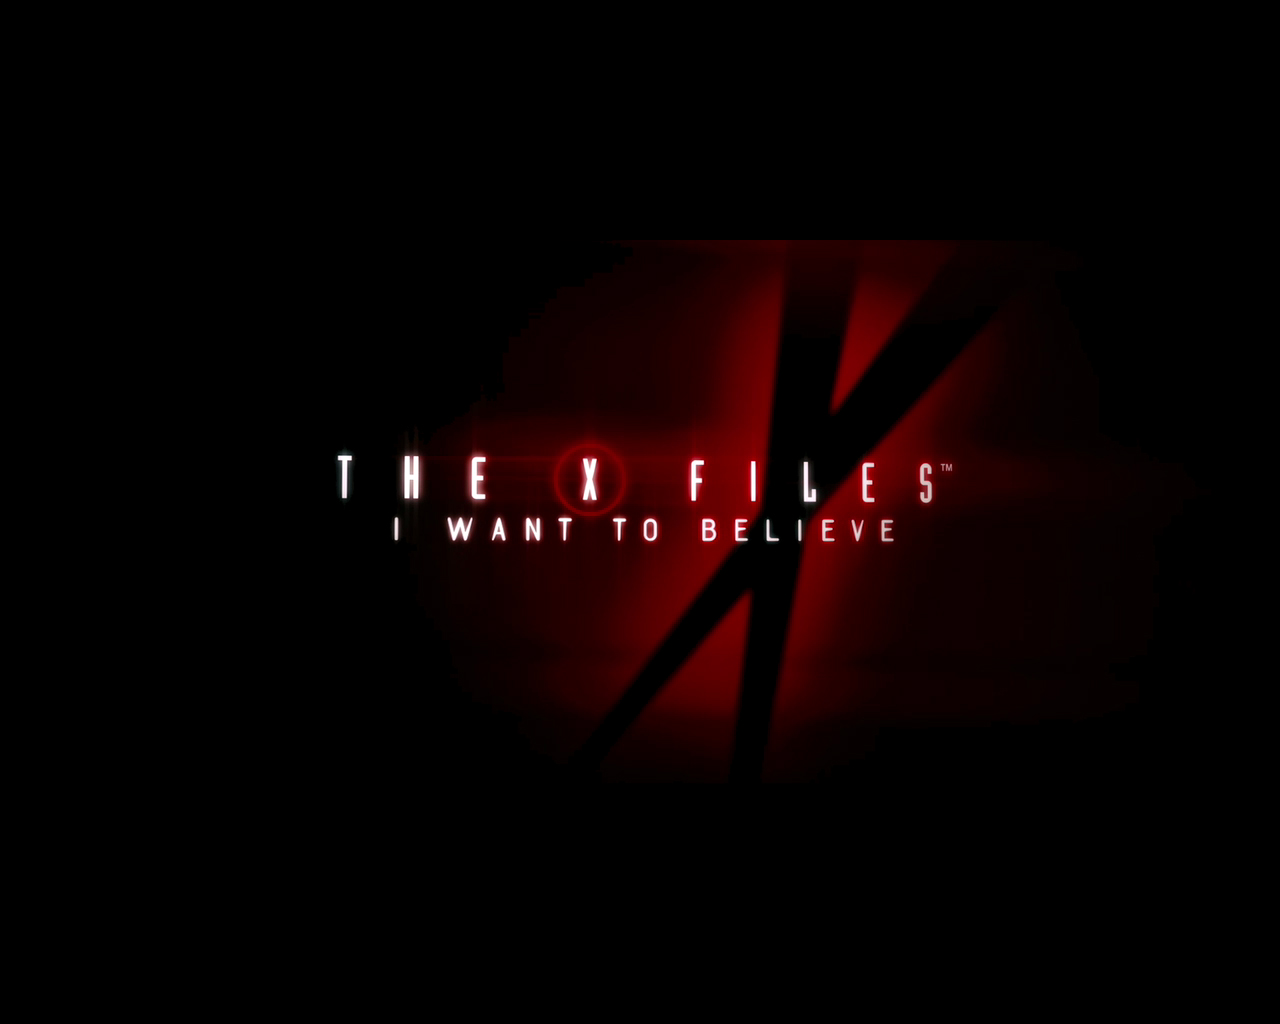 Download HQ Black background The X-Files I Want to Believe wallpaper / 1280x1024